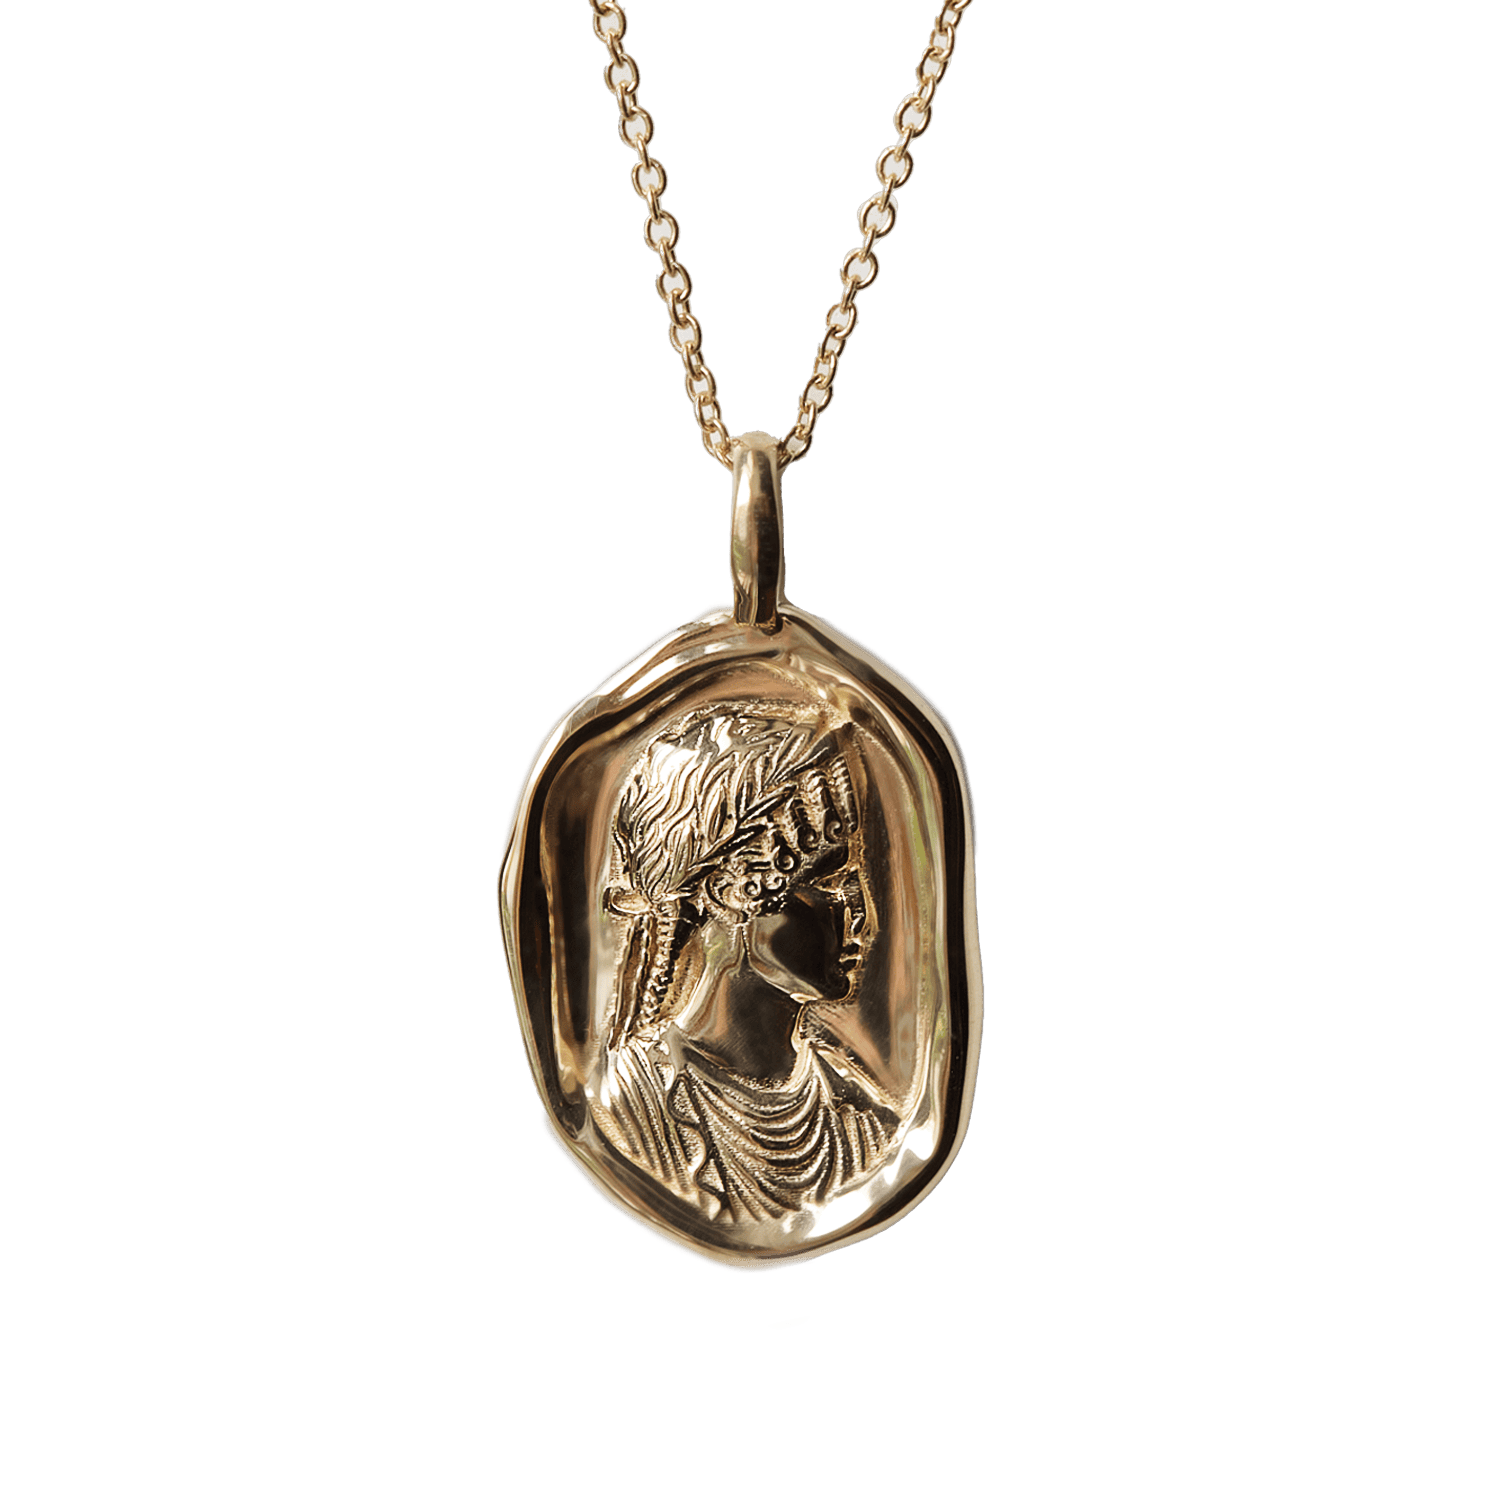 Agrippina Necklace - Molten Gold Pendant - Difficult Women